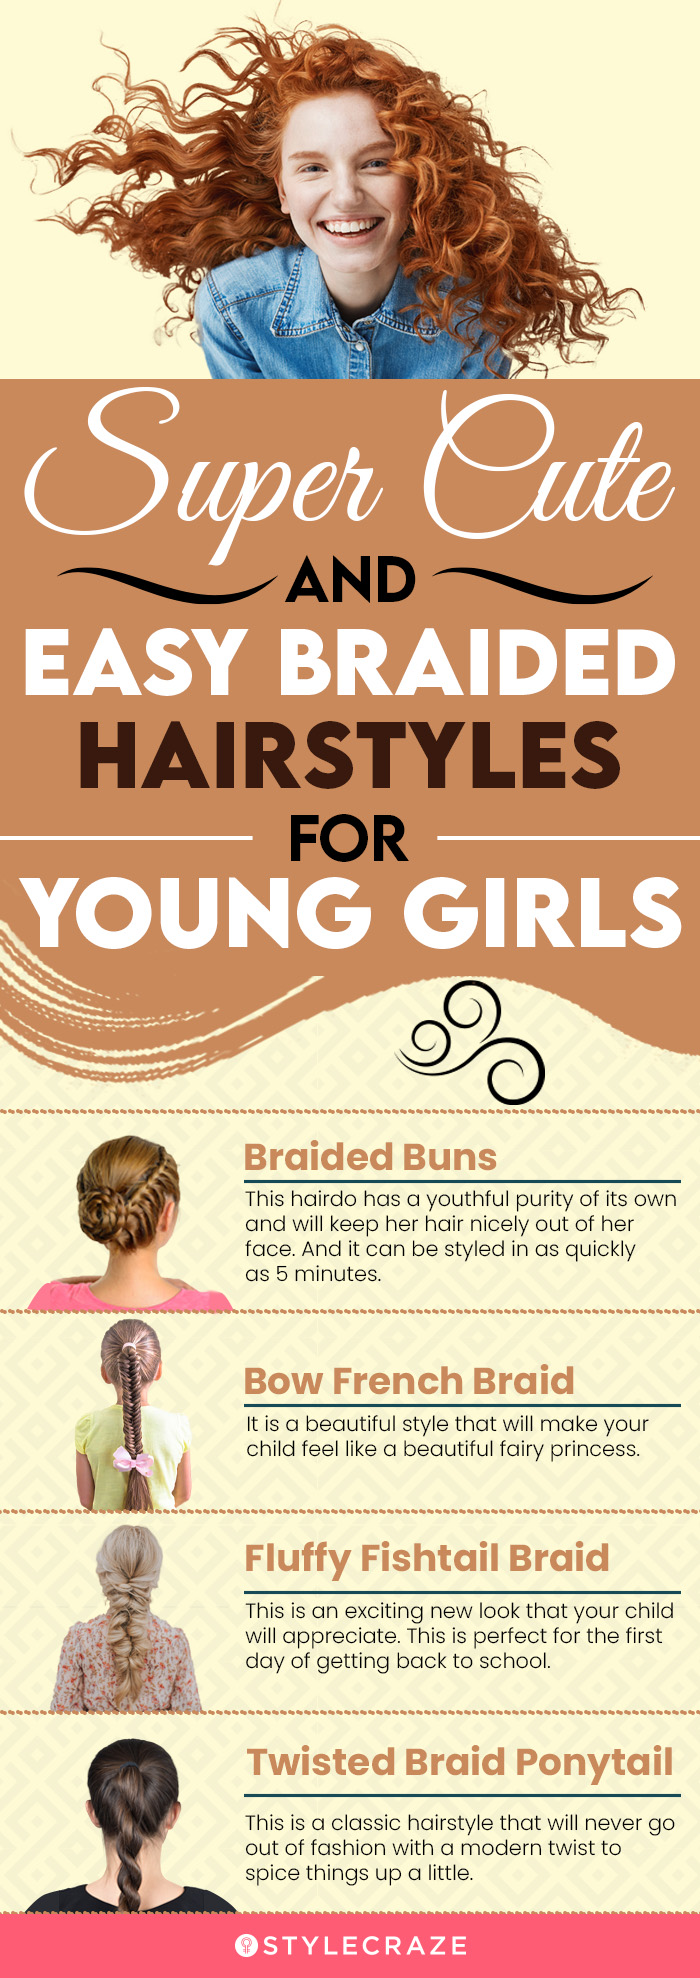 super cute and easy braided hairstyles for young girls [infographic]